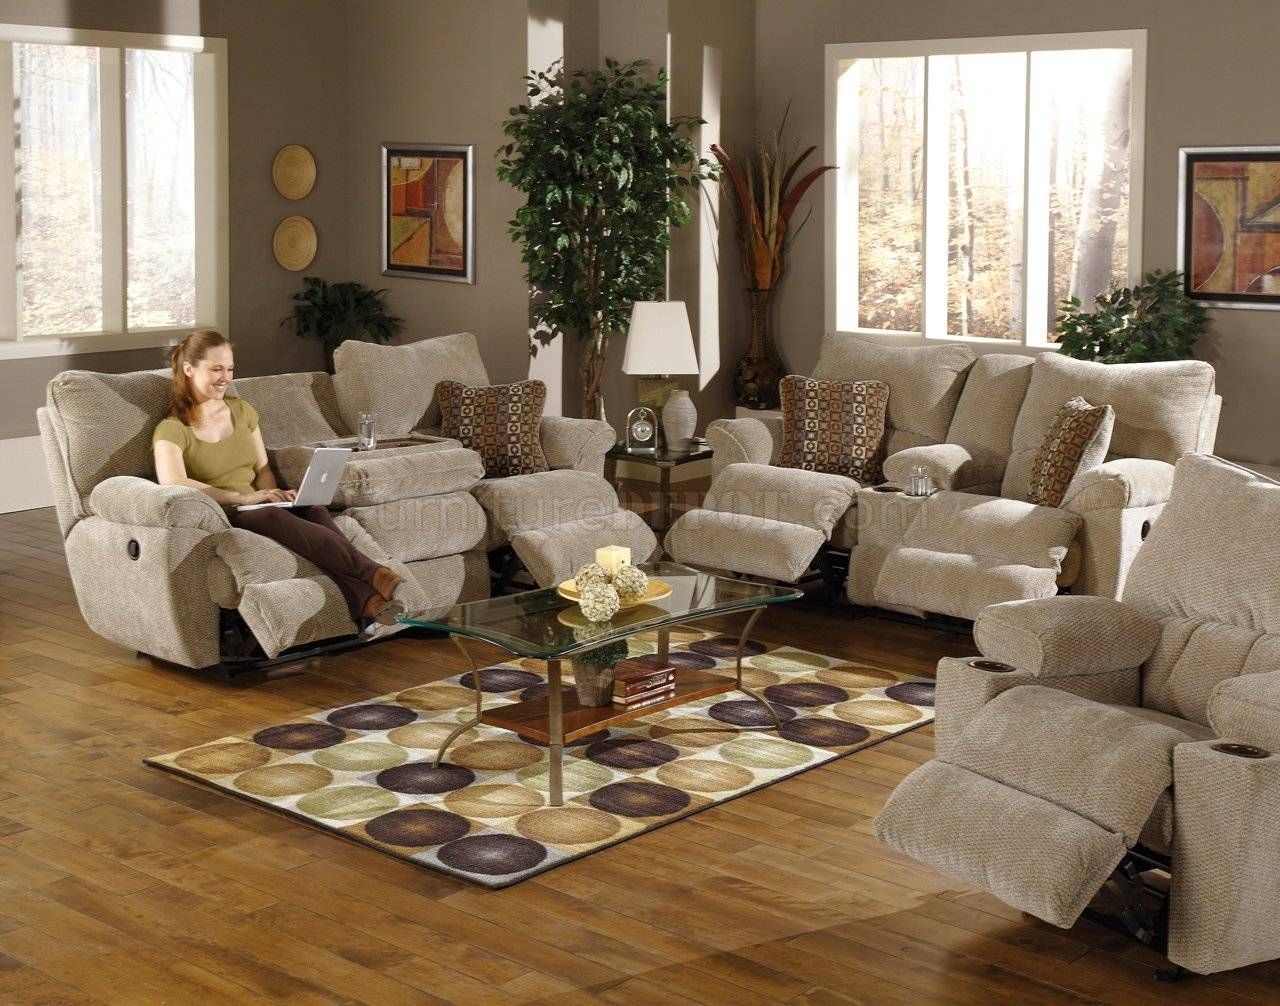 Sable/earth Fabric Madison Reclining Sofa & Loveseat Set Intended For Reclining Sofas And Loveseats Sets (View 2 of 15)